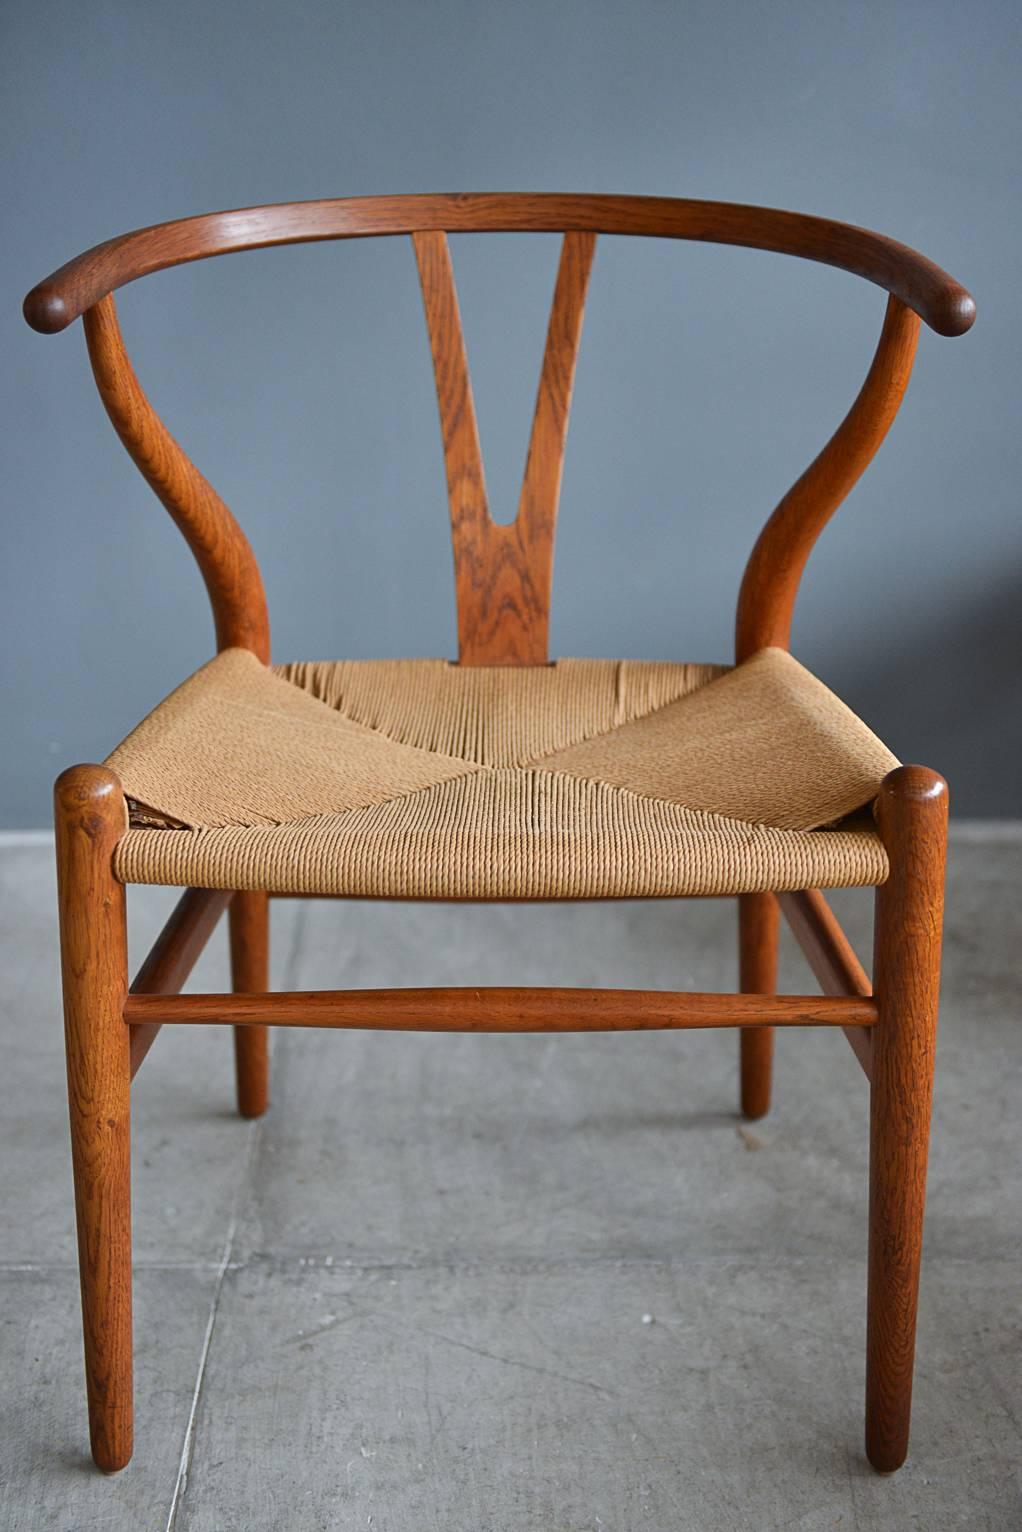 Original set of six Hans Wegner CH24 Wishbone dining chairs. Hand oiled original oak finish with woven seats. Seats are excellent with no breaks in the cord. Beautiful patina. Near perfect matching set.

Classic, iconic design and hard to find in